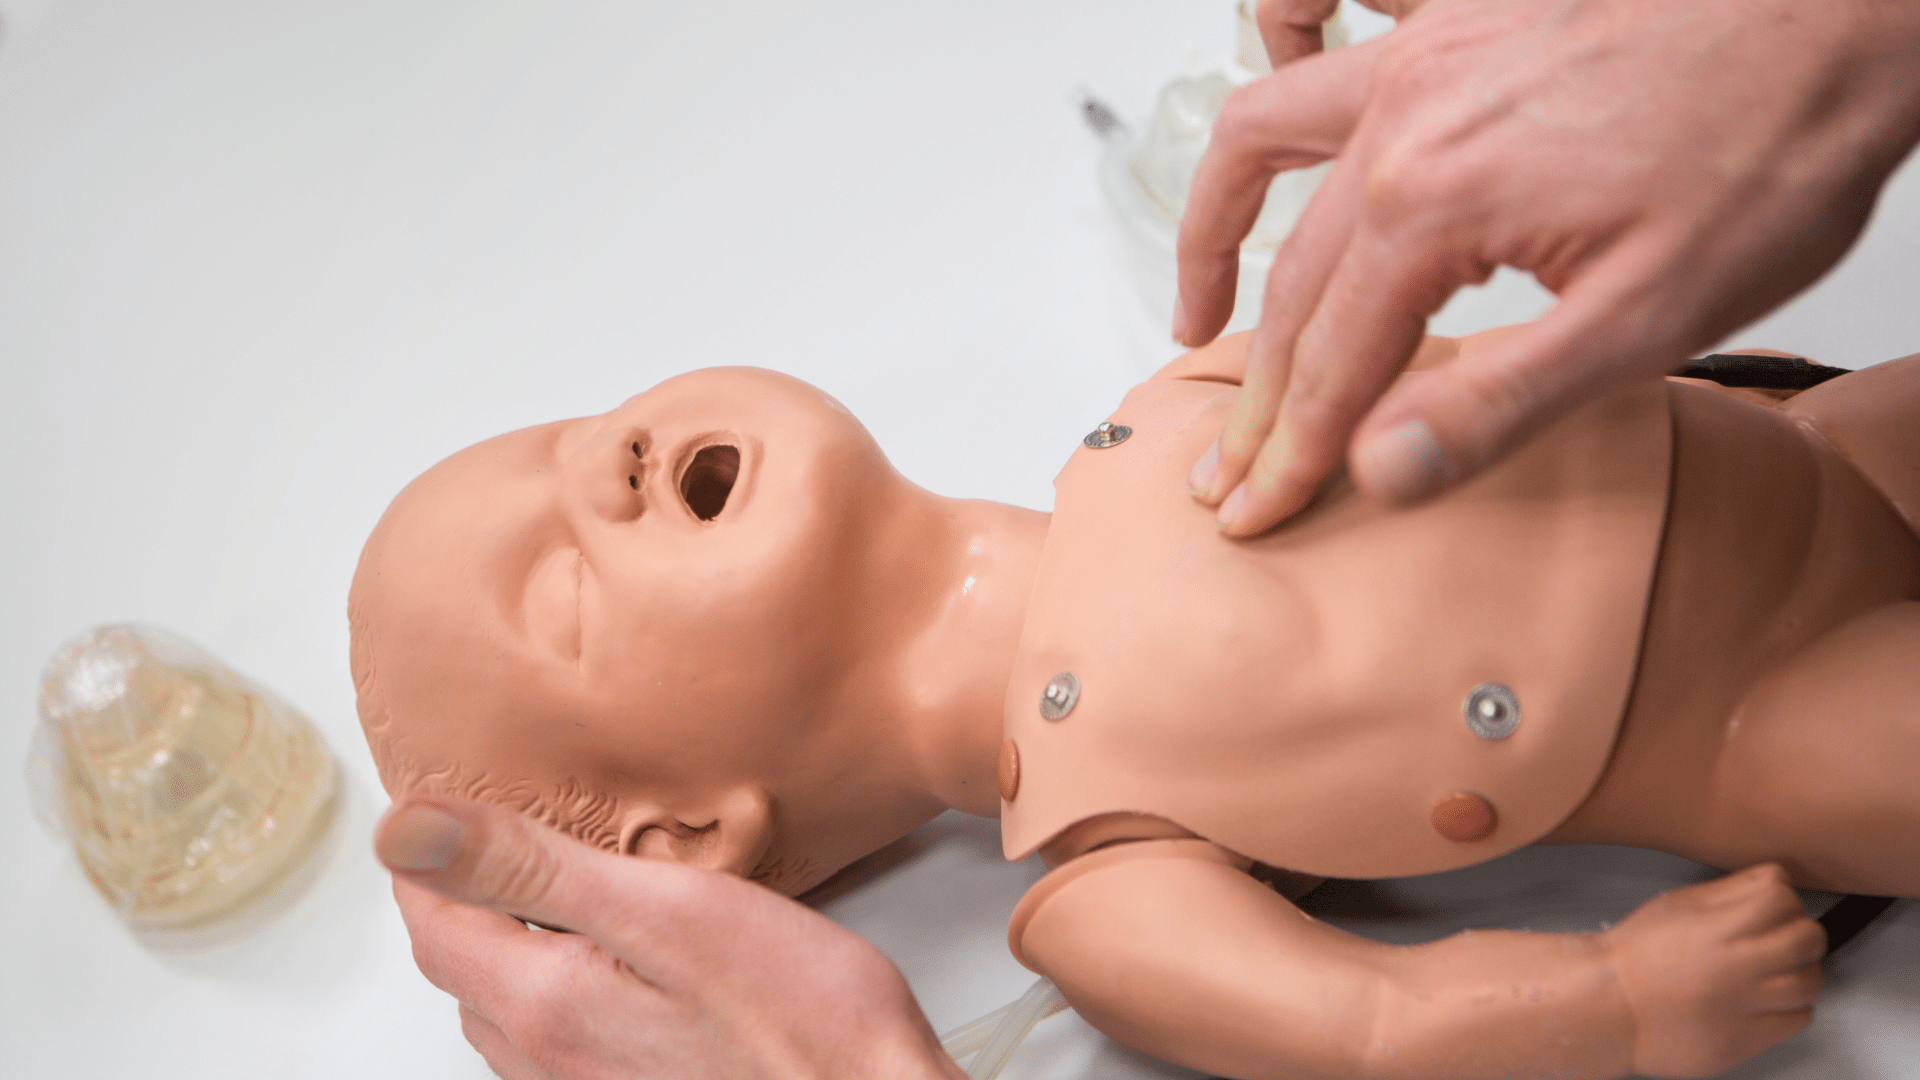 Performing CPR on a baby dummy.